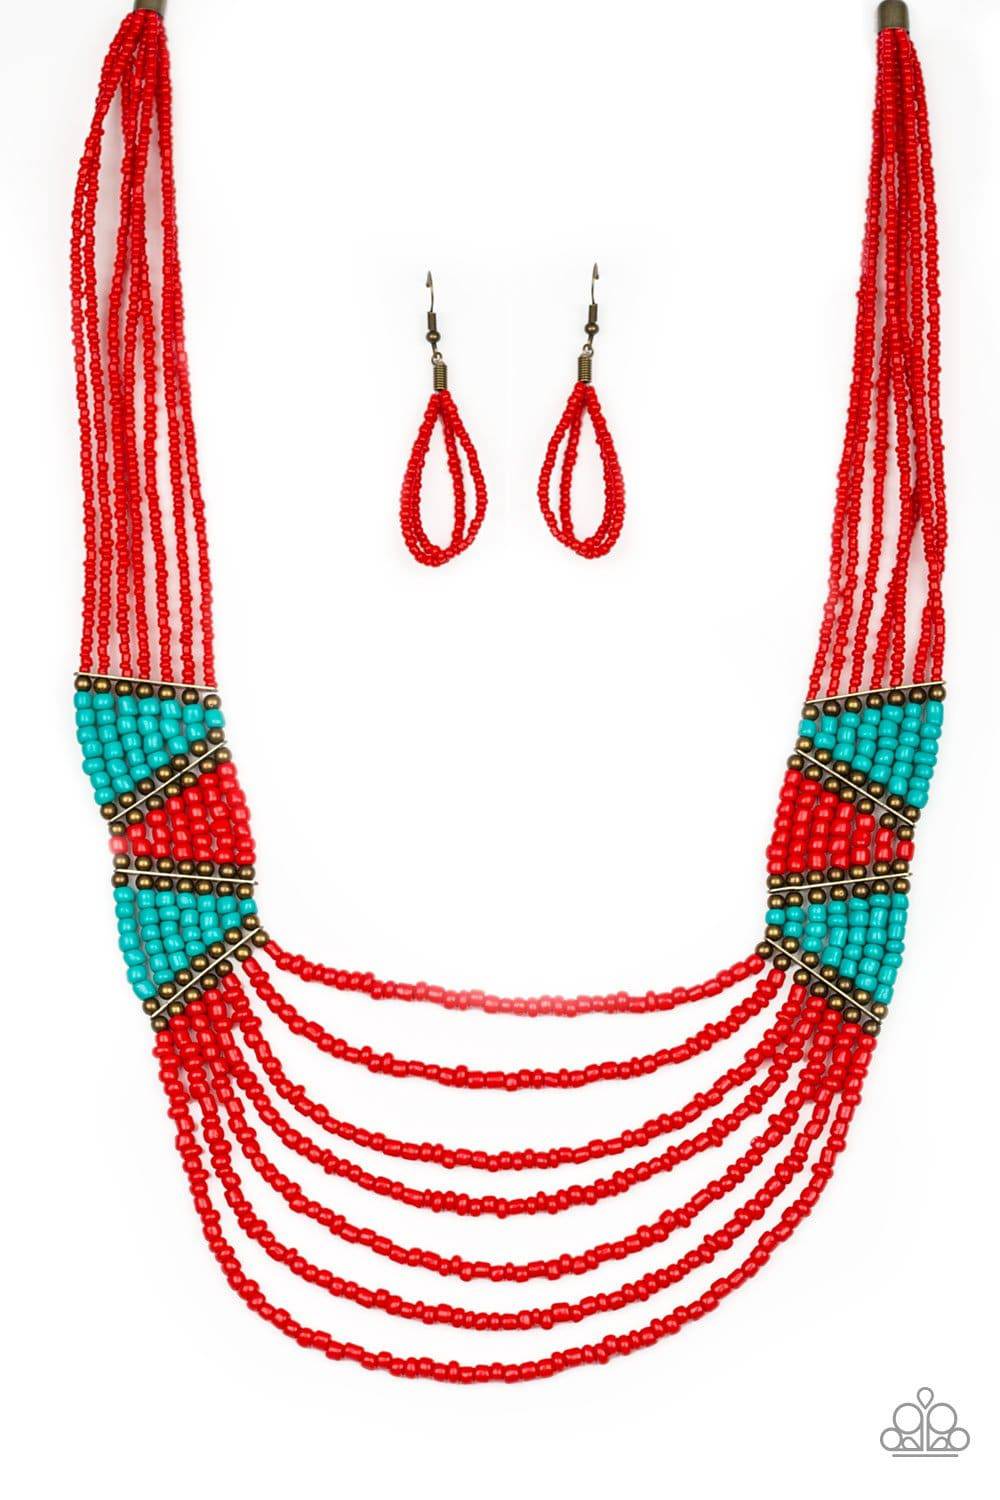 Kickin It Outback - Red Seed Bead Necklace - Paparazzi Accessories - GlaMarous Titi Jewels